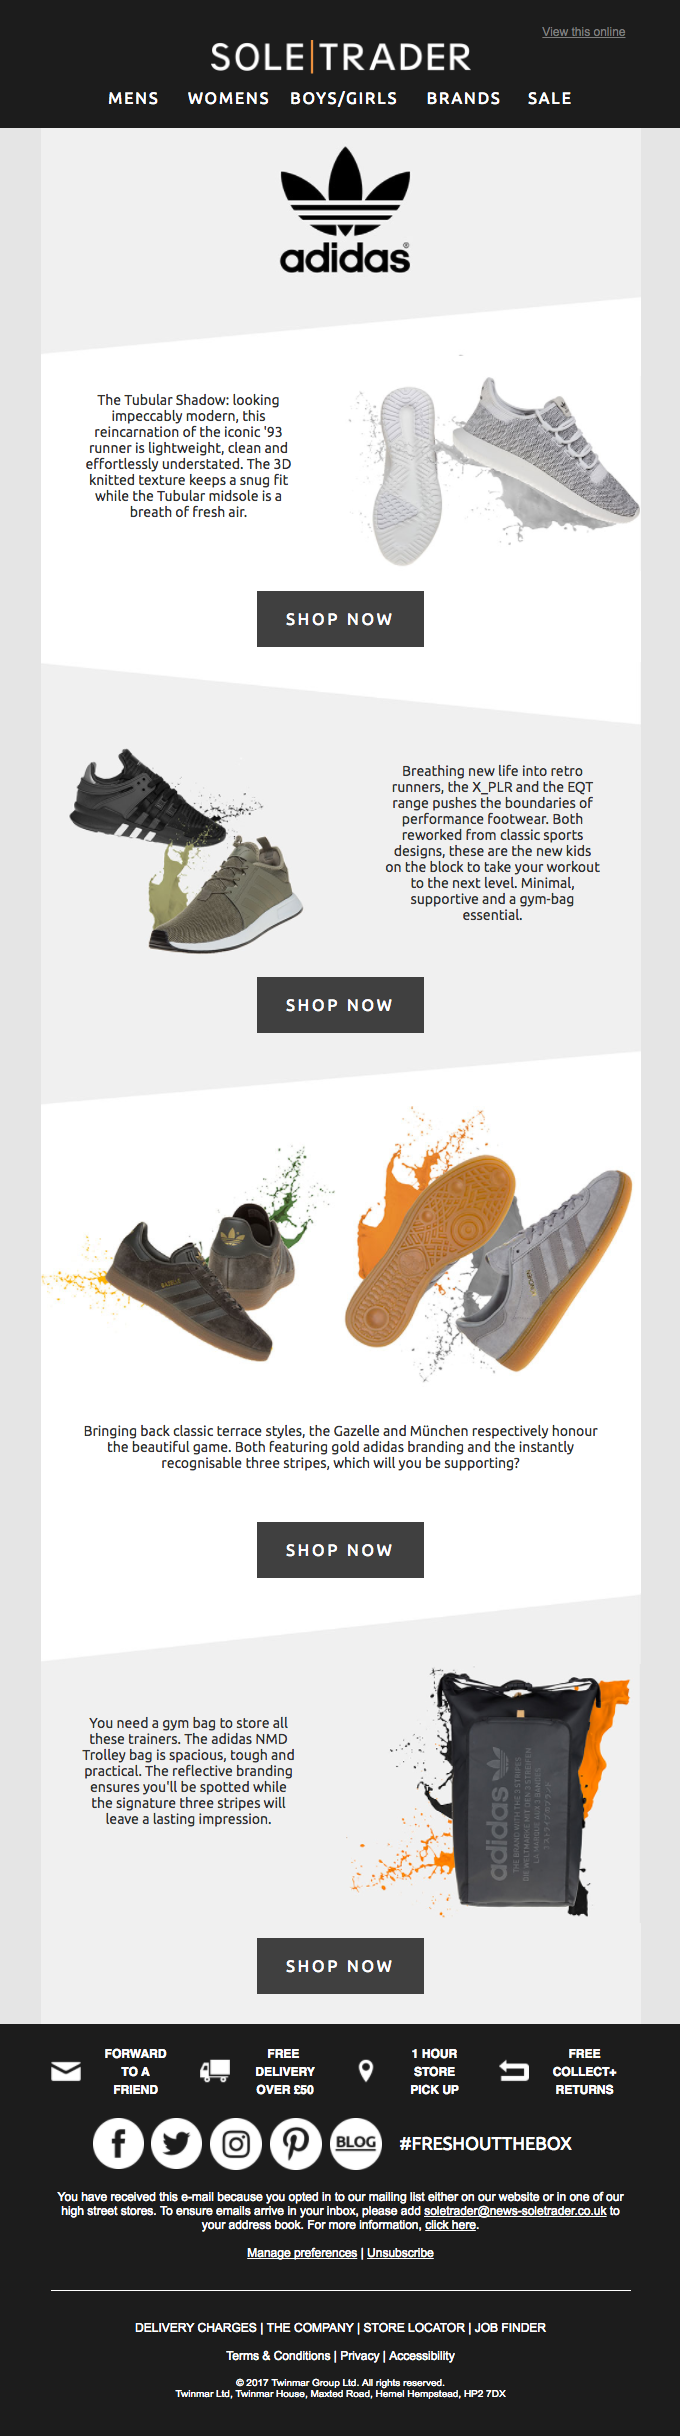 adidas: the new and most wanted from SOLETRADER - Desktop Email View ...